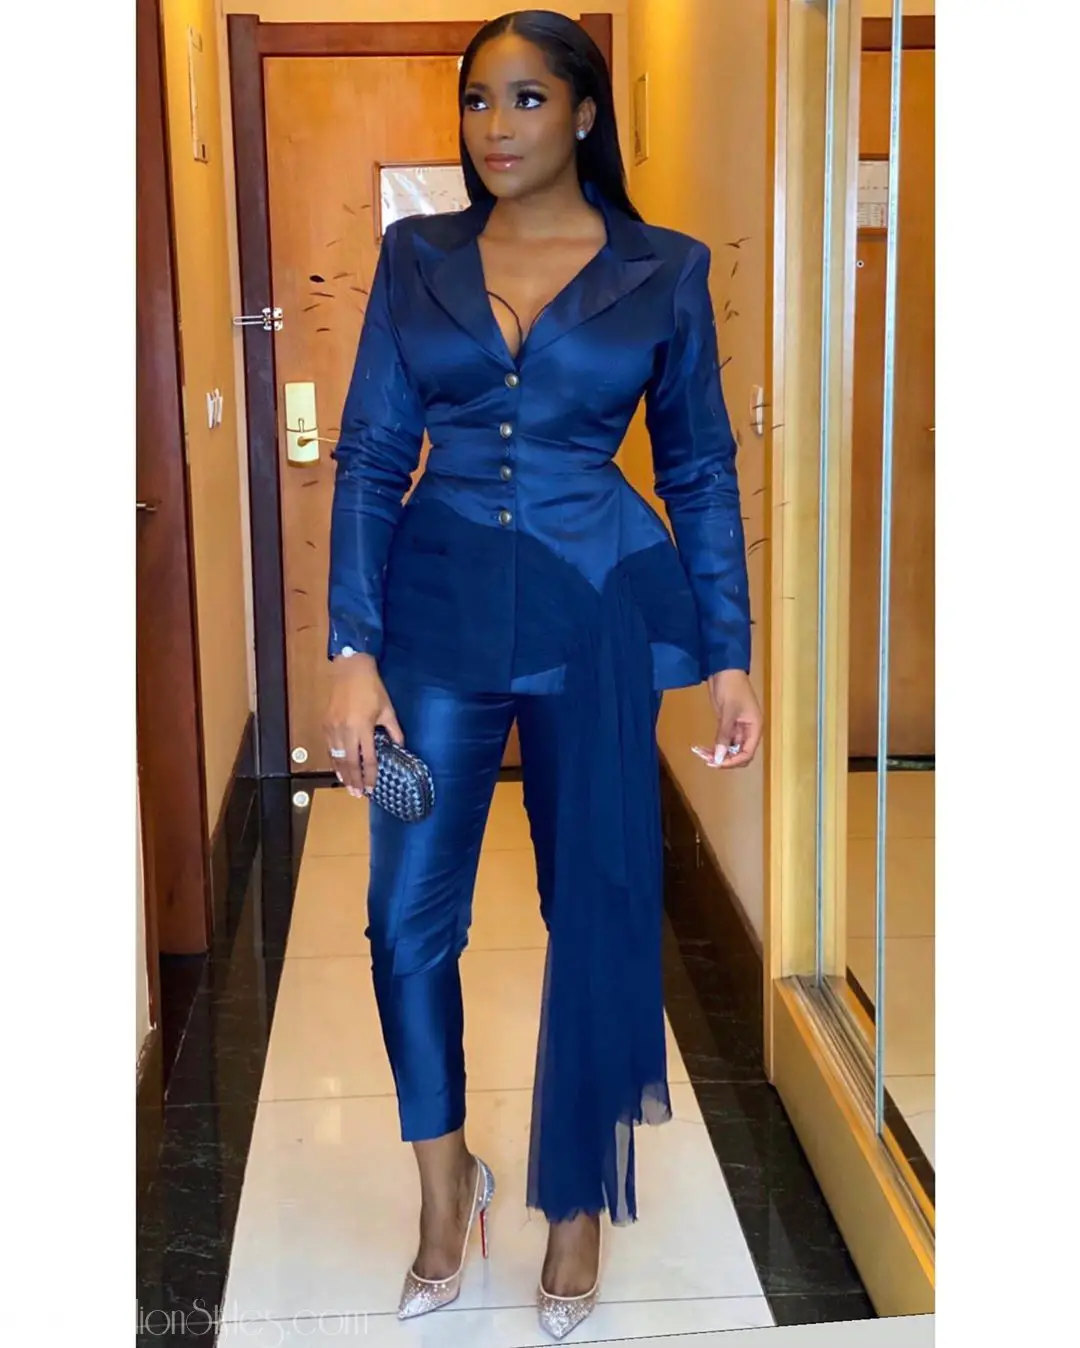 Guess Who's Back? Styles By Sylvia Nduka Is Shaking Instagram